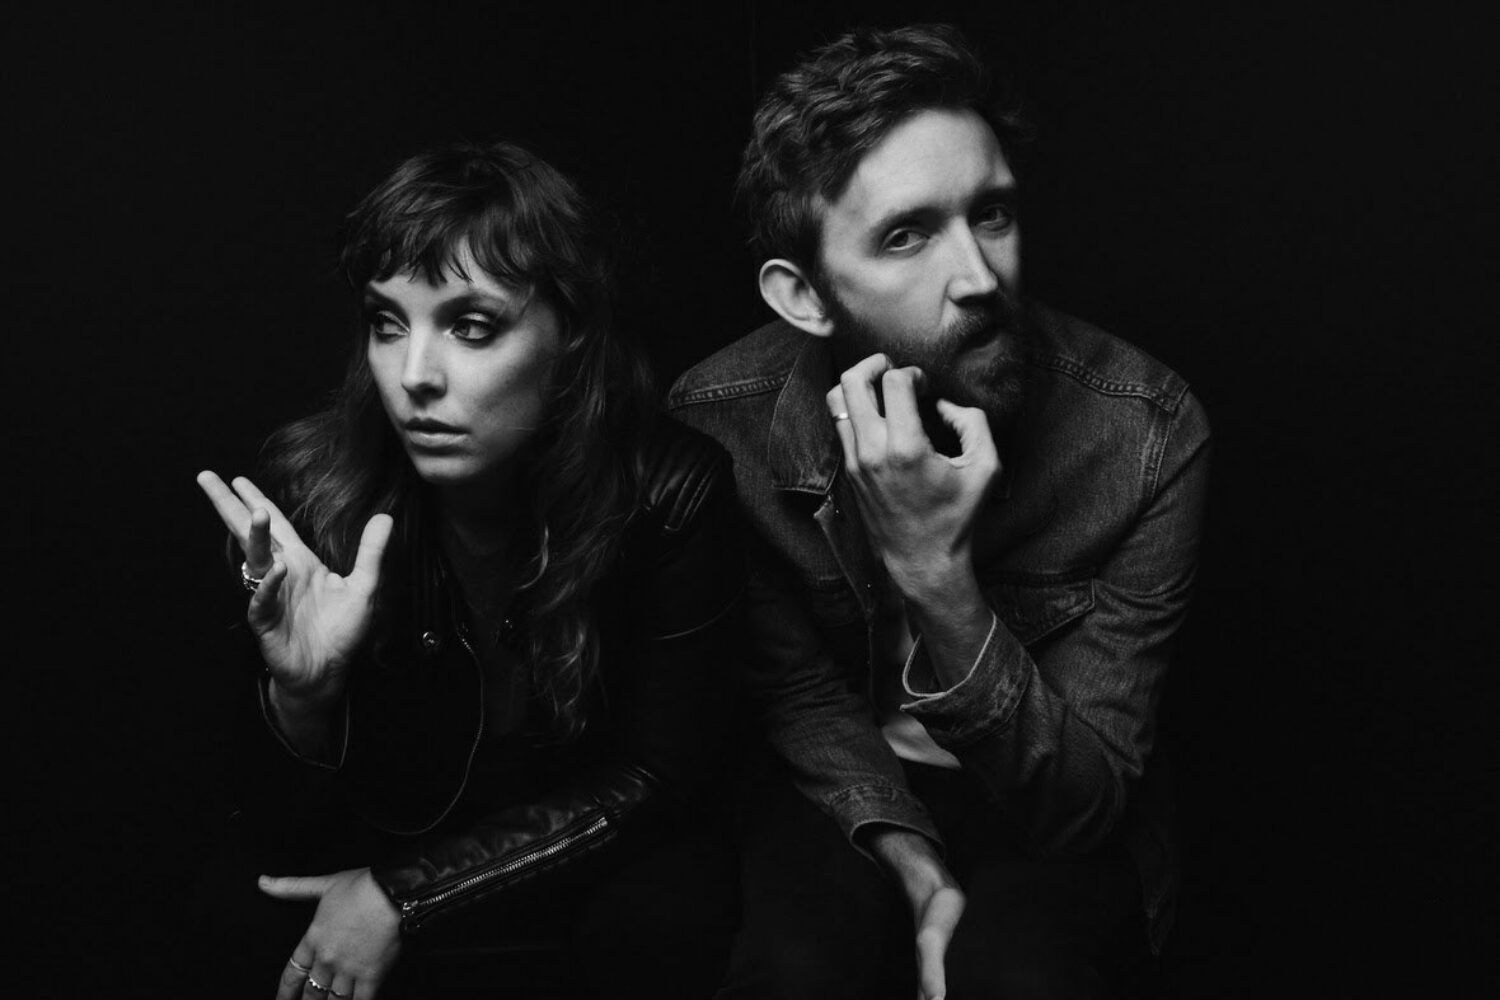 Sylvan Esso are going on a UK tour in November